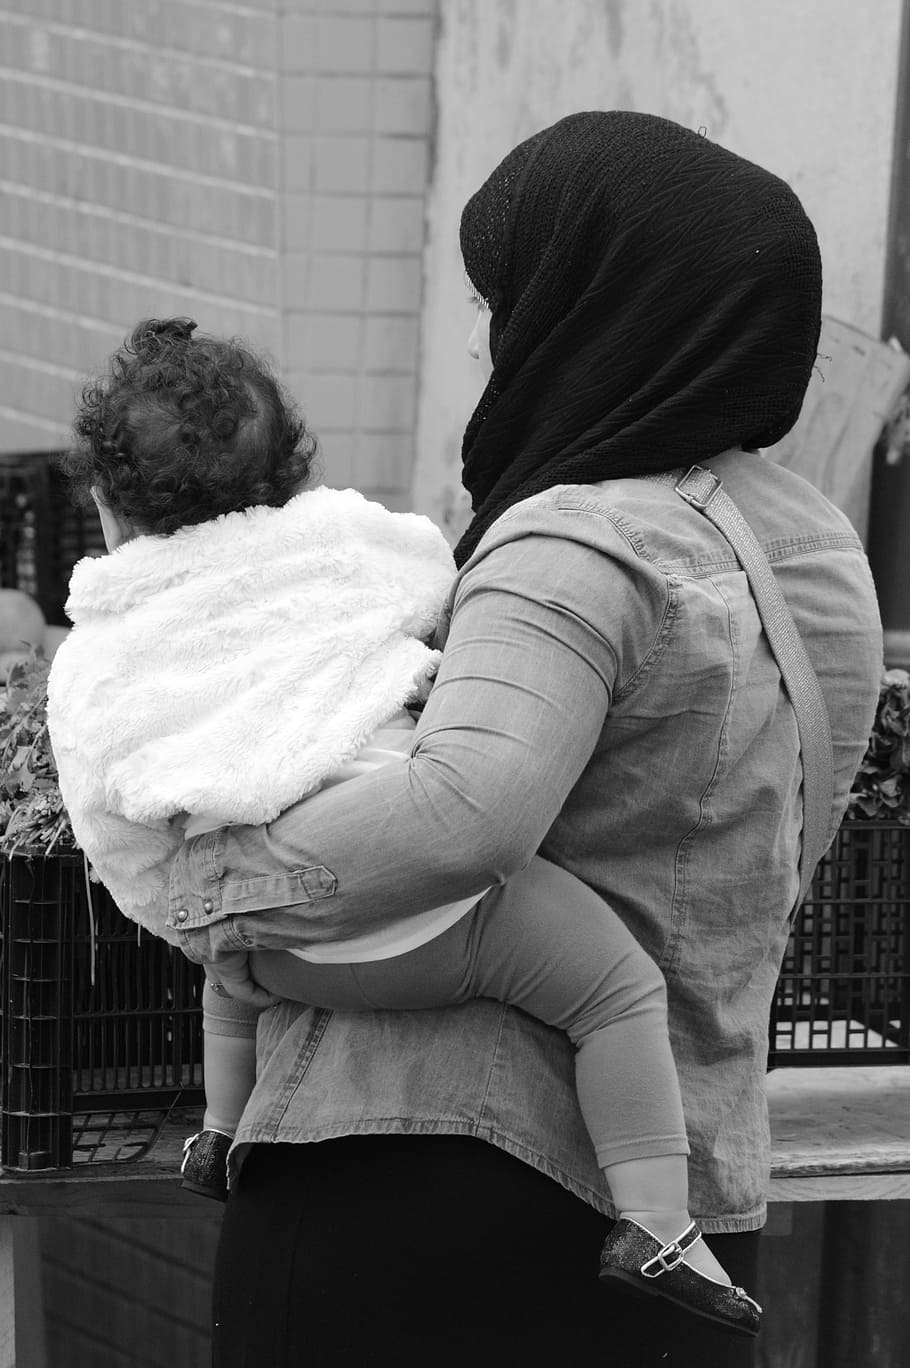 HD wallpaper: woman carrying baby, Child, People, Muslim, Kerchief, mother  | Wallpaper Flare